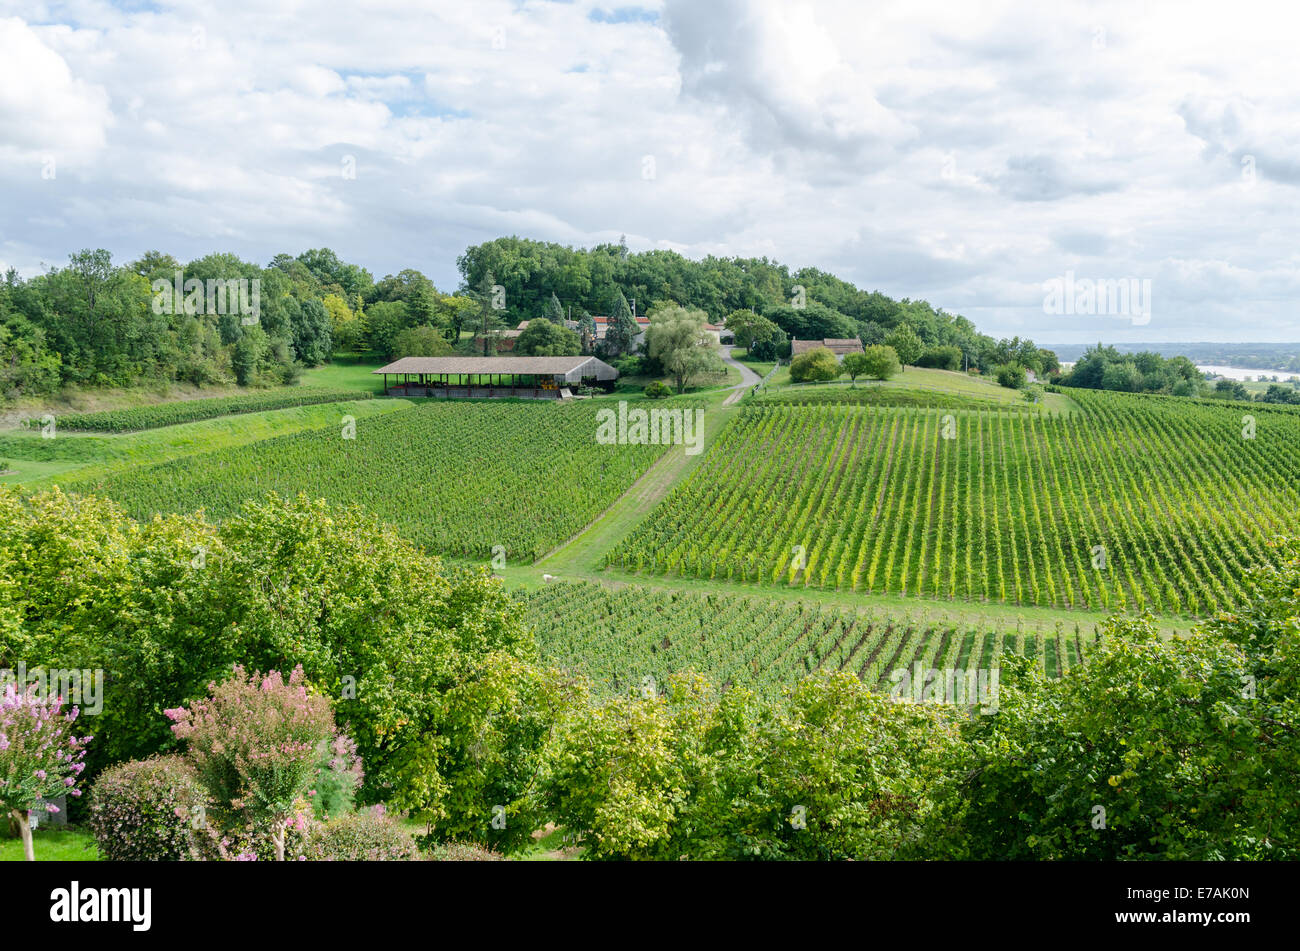 Vineyards of Chateau de la Riviere in the Fronsac region of Bordeaux, France Stock Photo